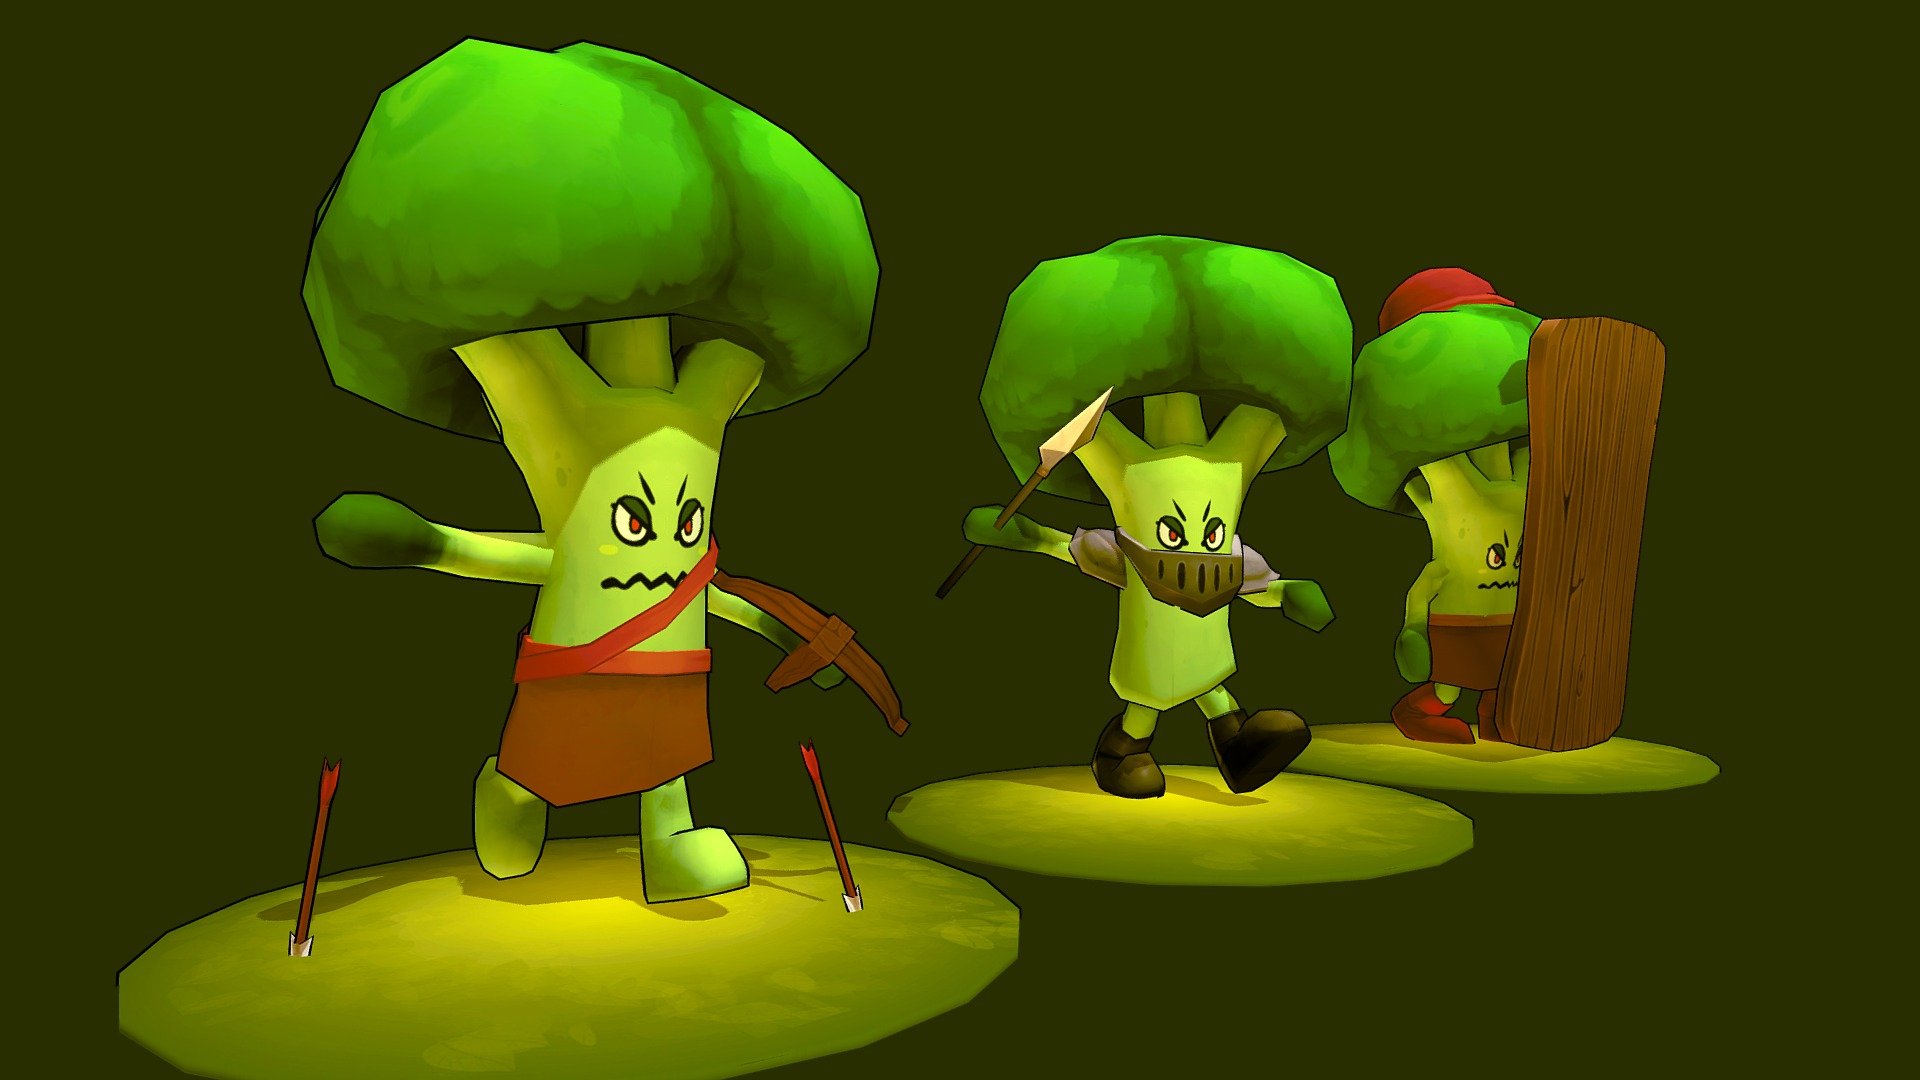 Basic enemies for an upcoming game 👀 - Broccoli bois - 3D model by psychonautic 3d model